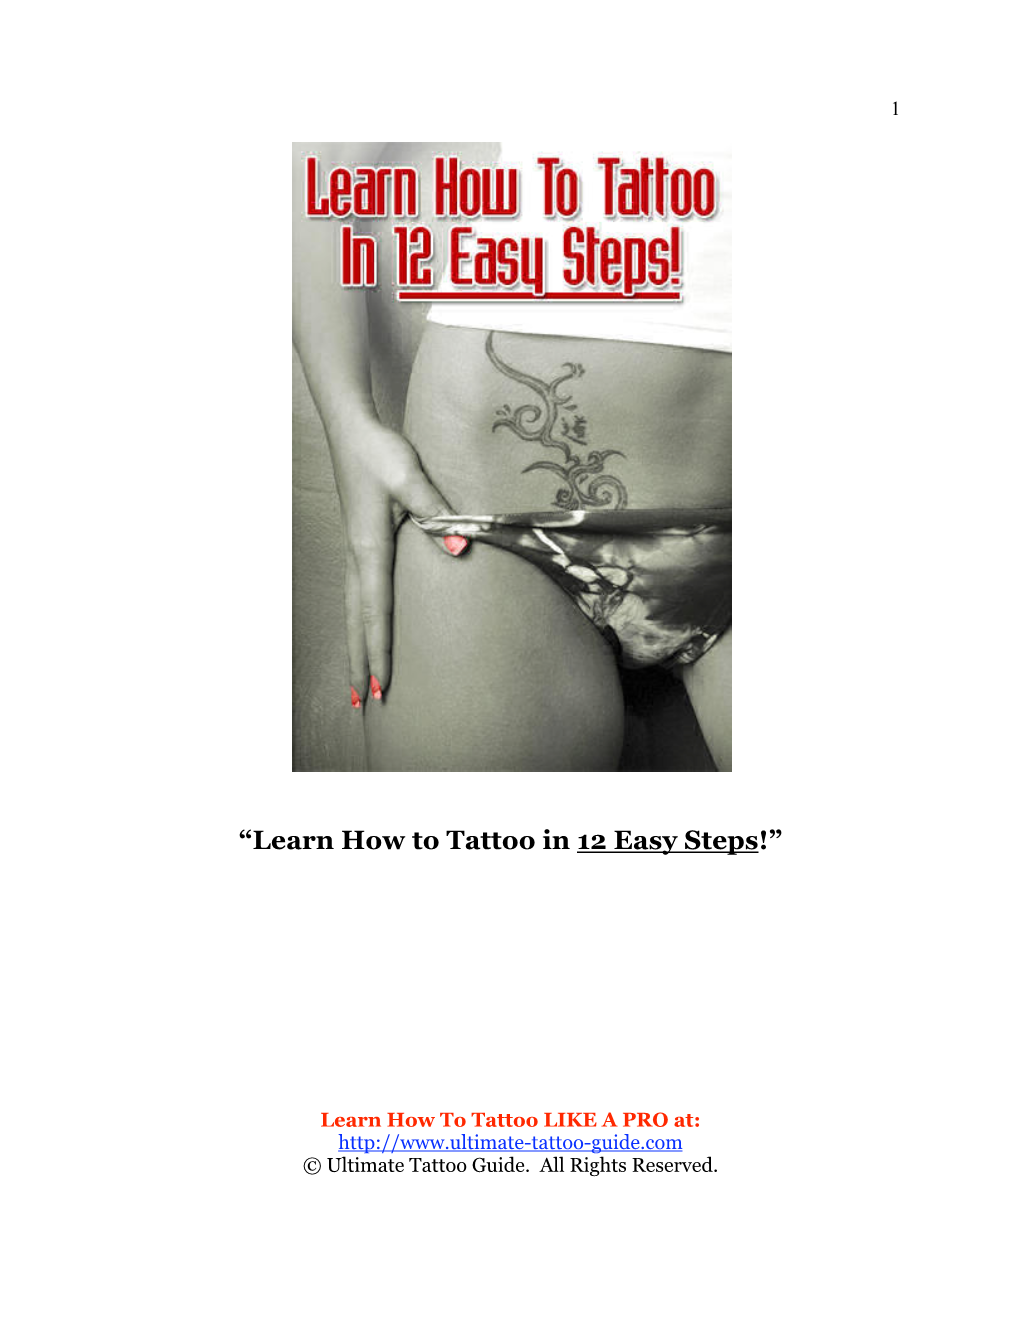 “Learn How to Tattoo in 12 Easy Steps!”